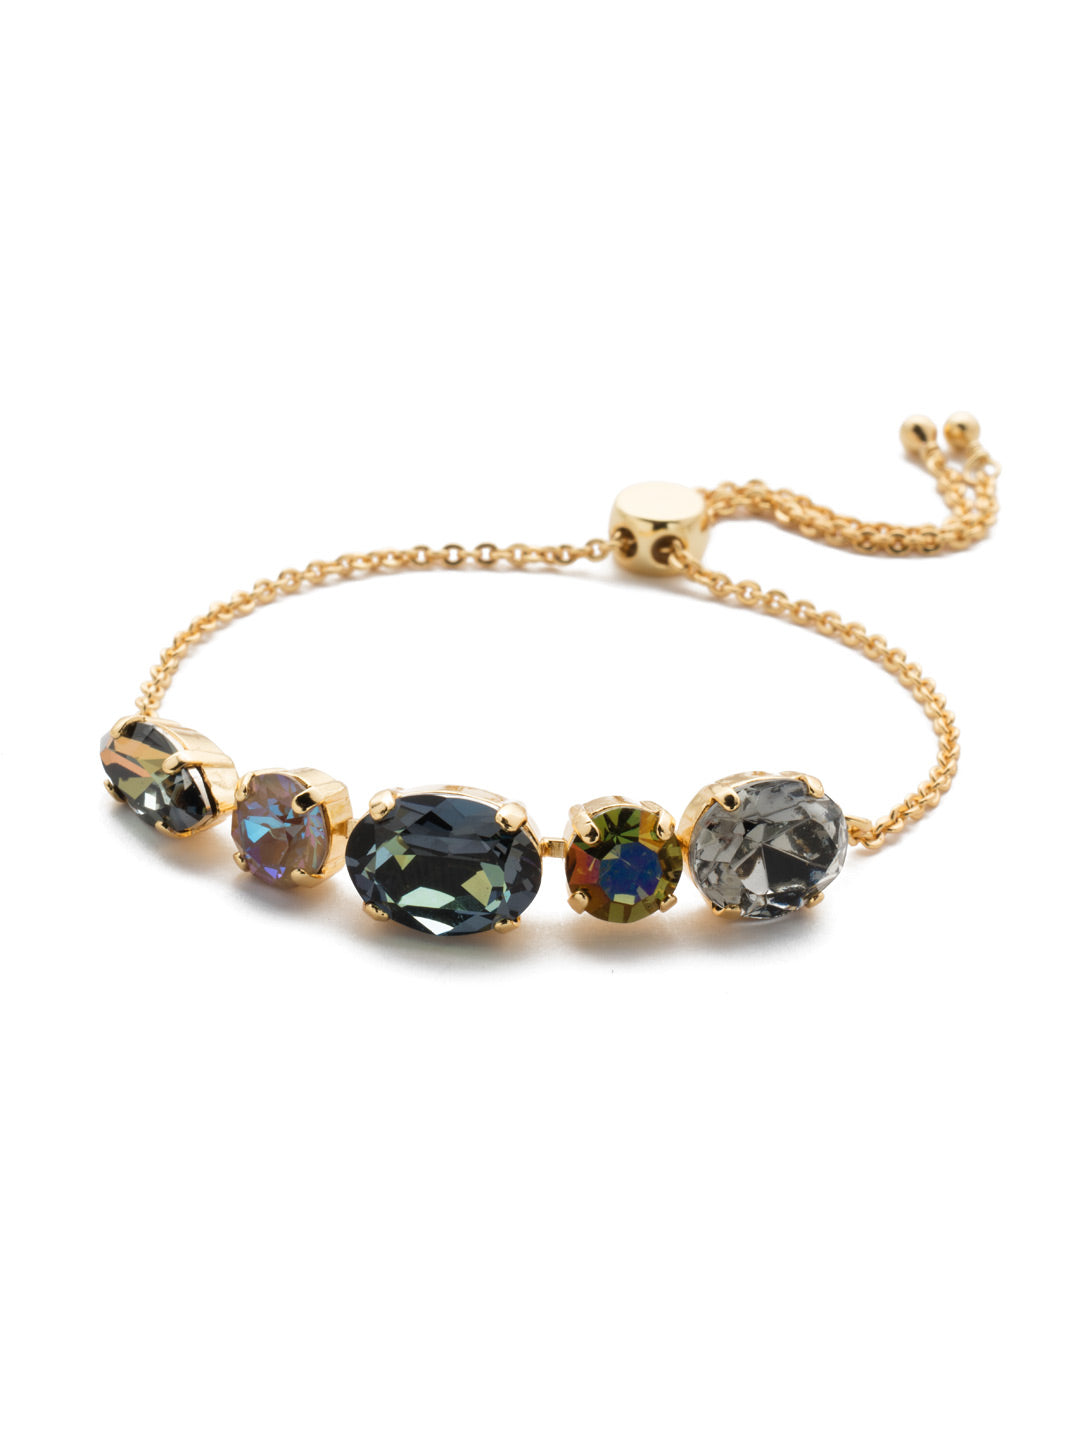 Martina Slider Bracelet - BET6BGCSM - The Martina Slider Bracelet gives sparkle fans a bit of everything they love in cushion emerald, round and navette crystals. Just adjust to your wrist size and go. From Sorrelli's Cashmere collection in our Bright Gold-tone finish.